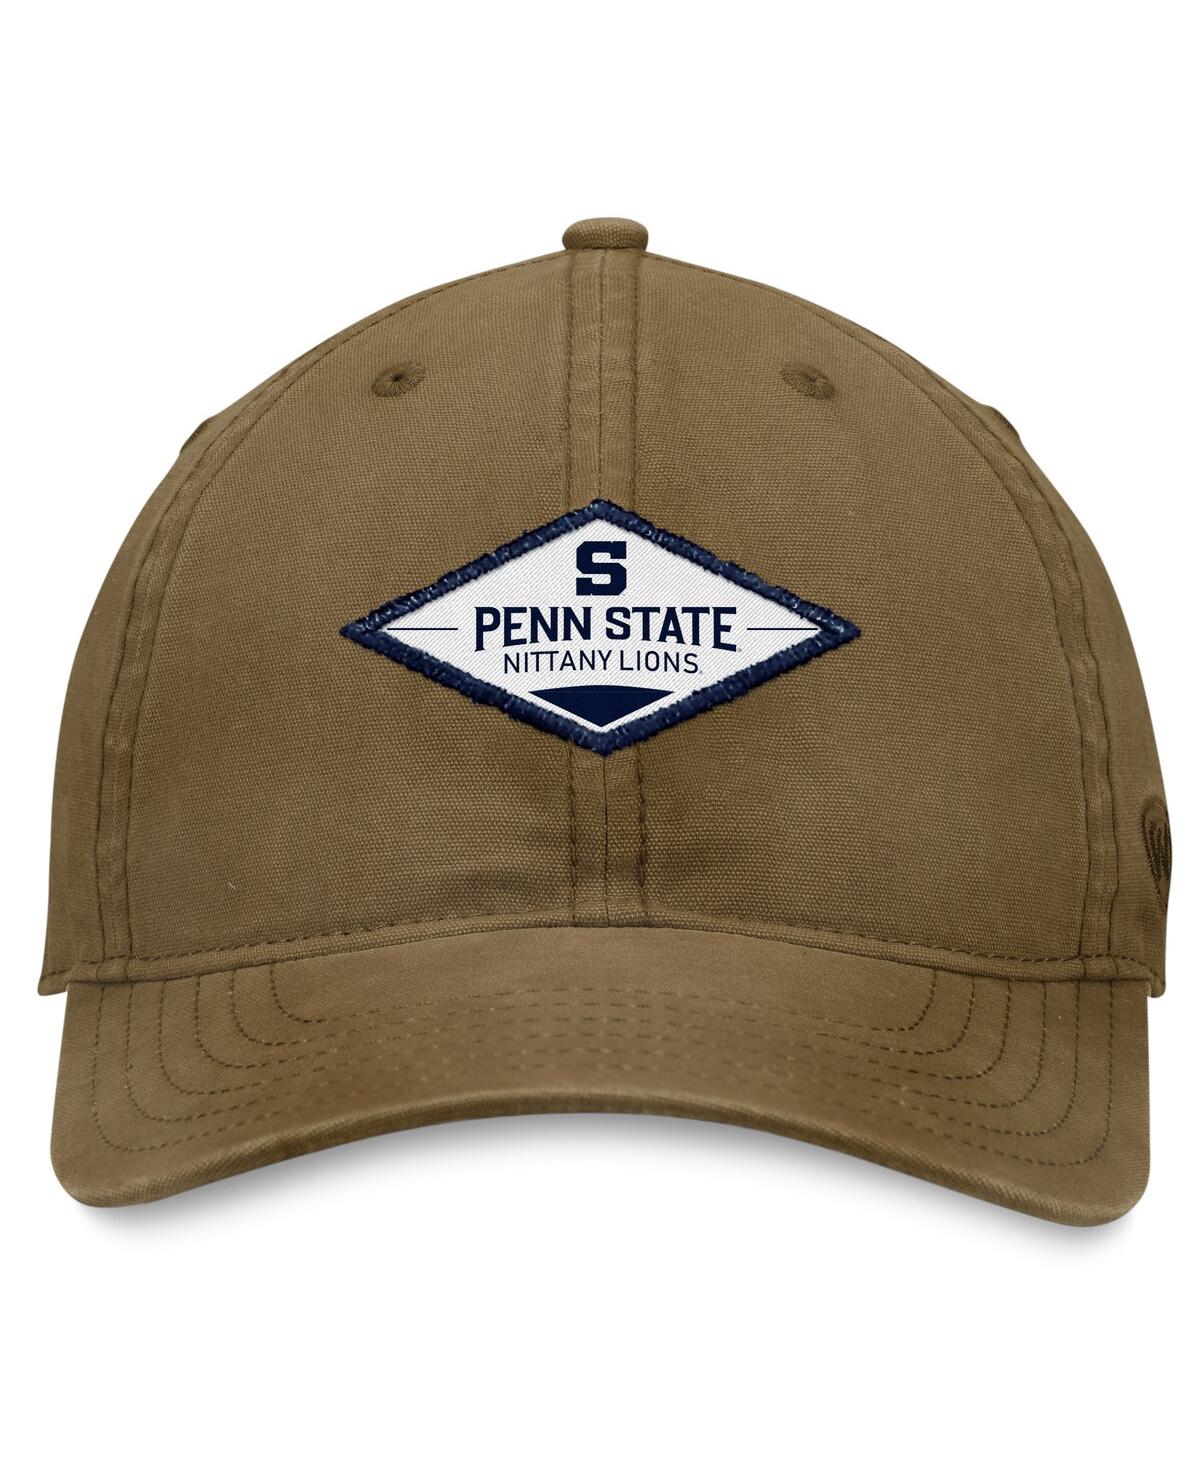 Shop Top Of The World Men's  Khaki Penn State Nittany Lions Adventure Adjustable Hat